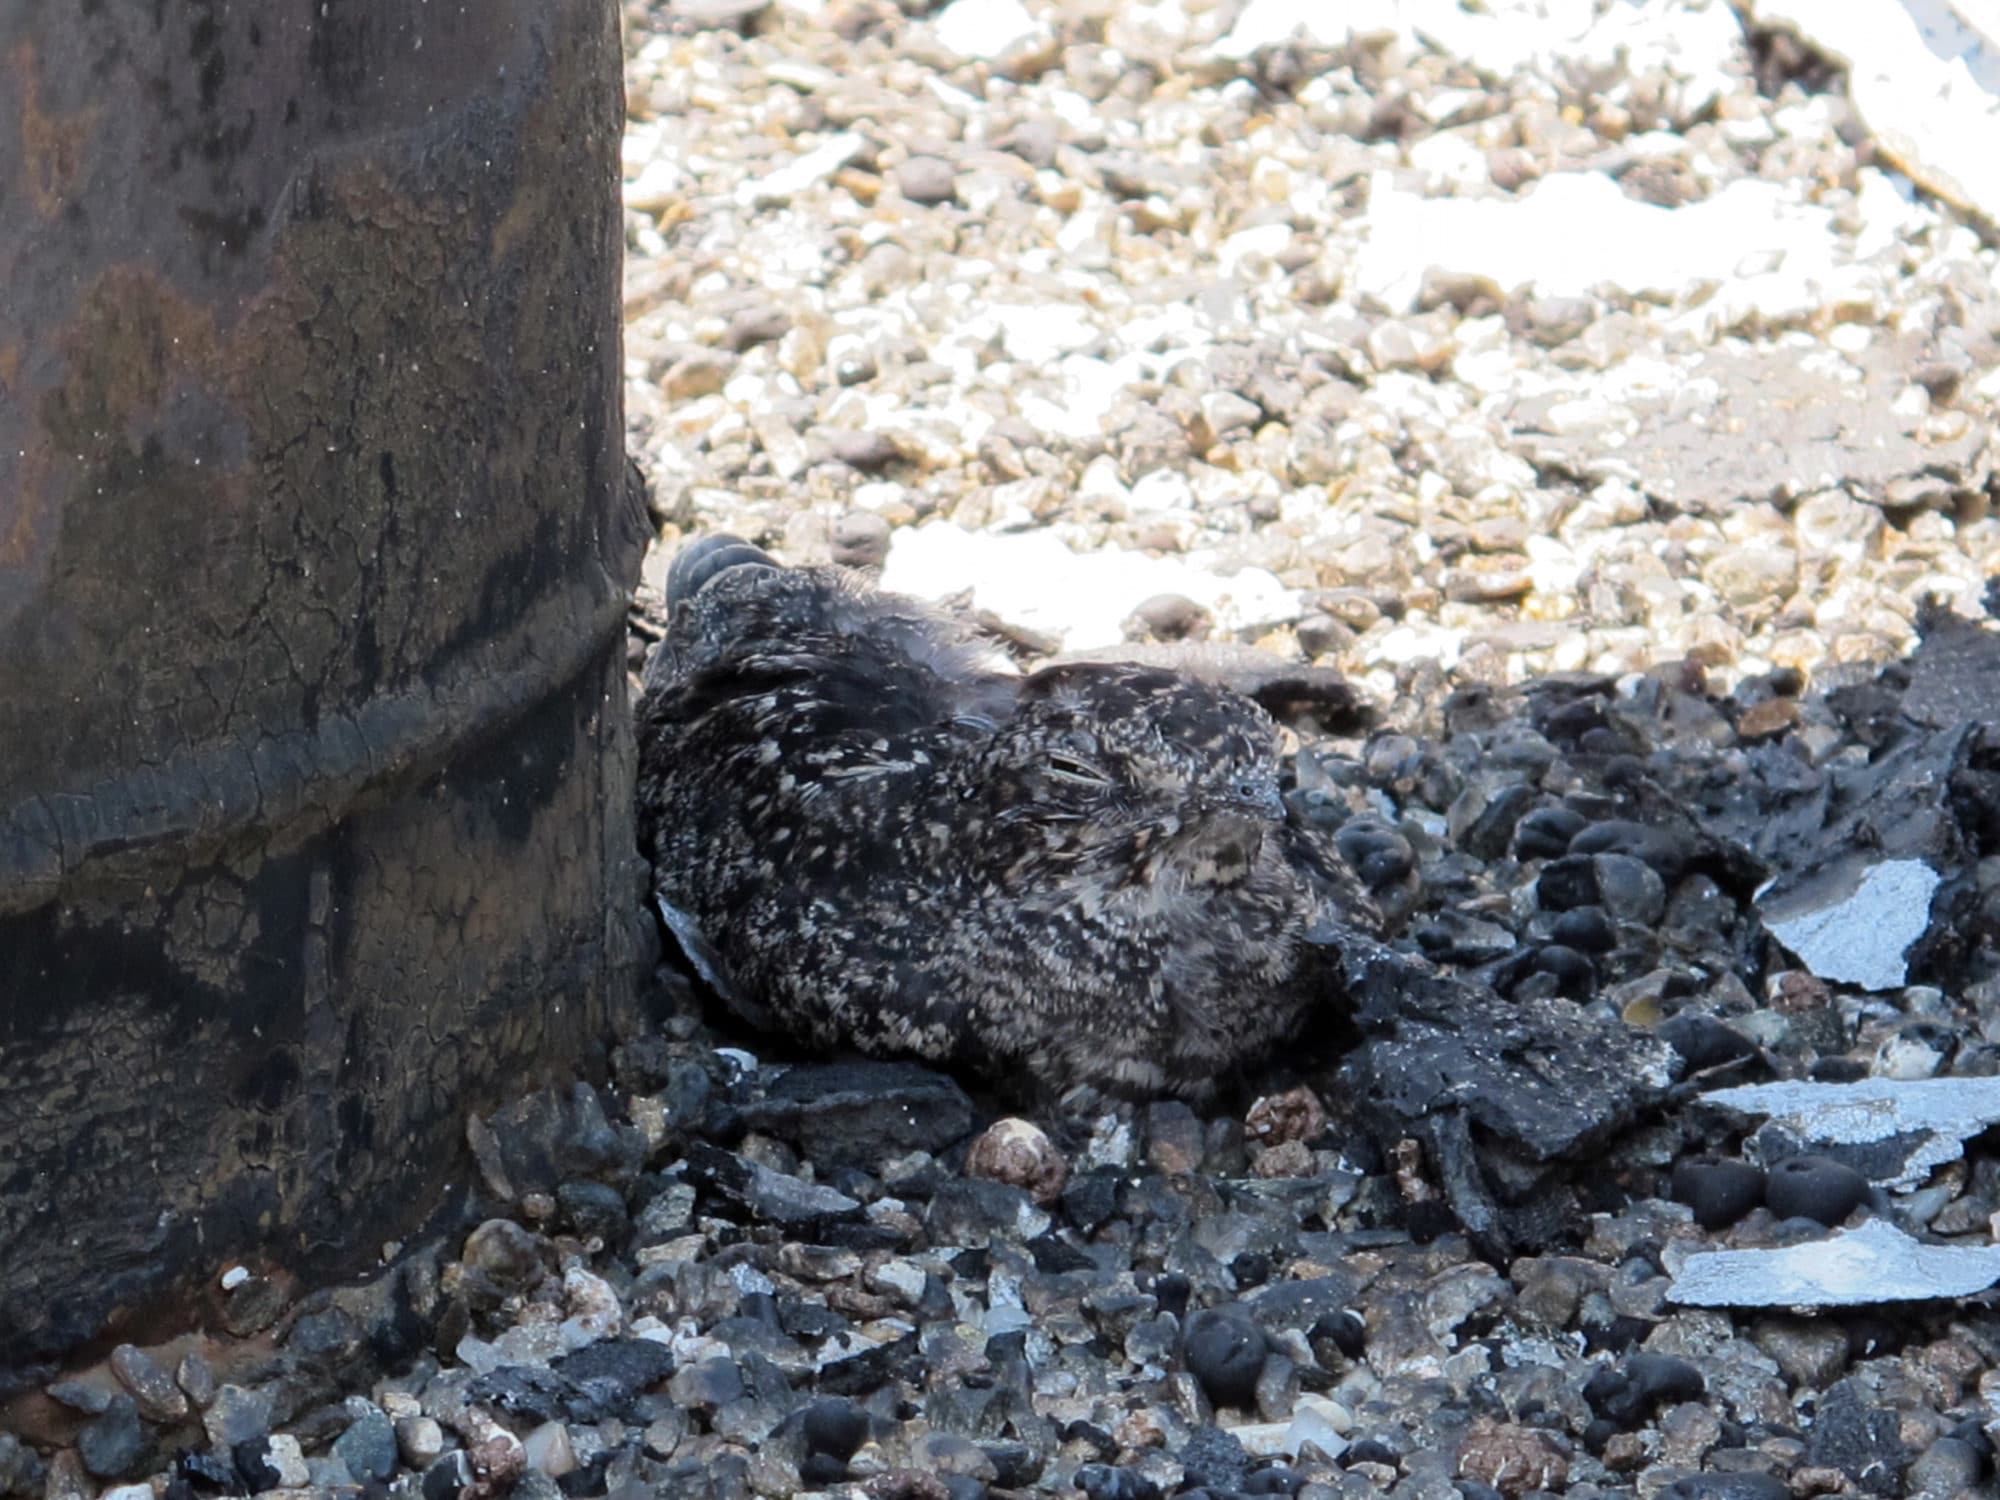 A nighthawk chick roosts on a peastone gravel roof. (photo © Brett Amy Thelen)